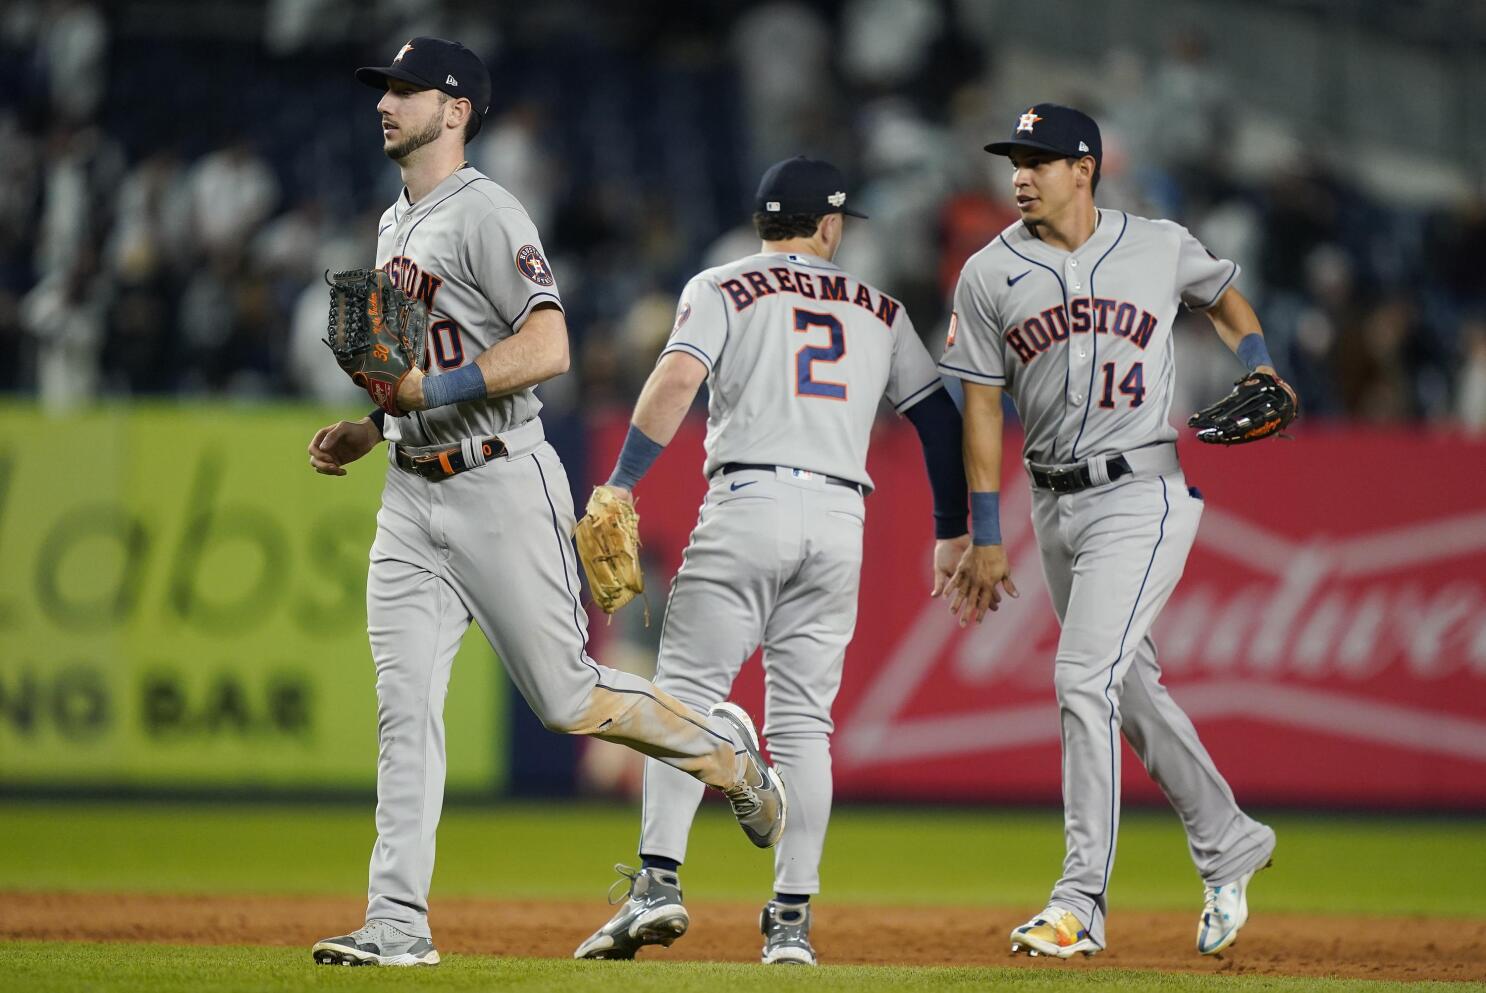 MLB Playoffs: Astros try to sweep Yanks, Phils lead Pads 3-1